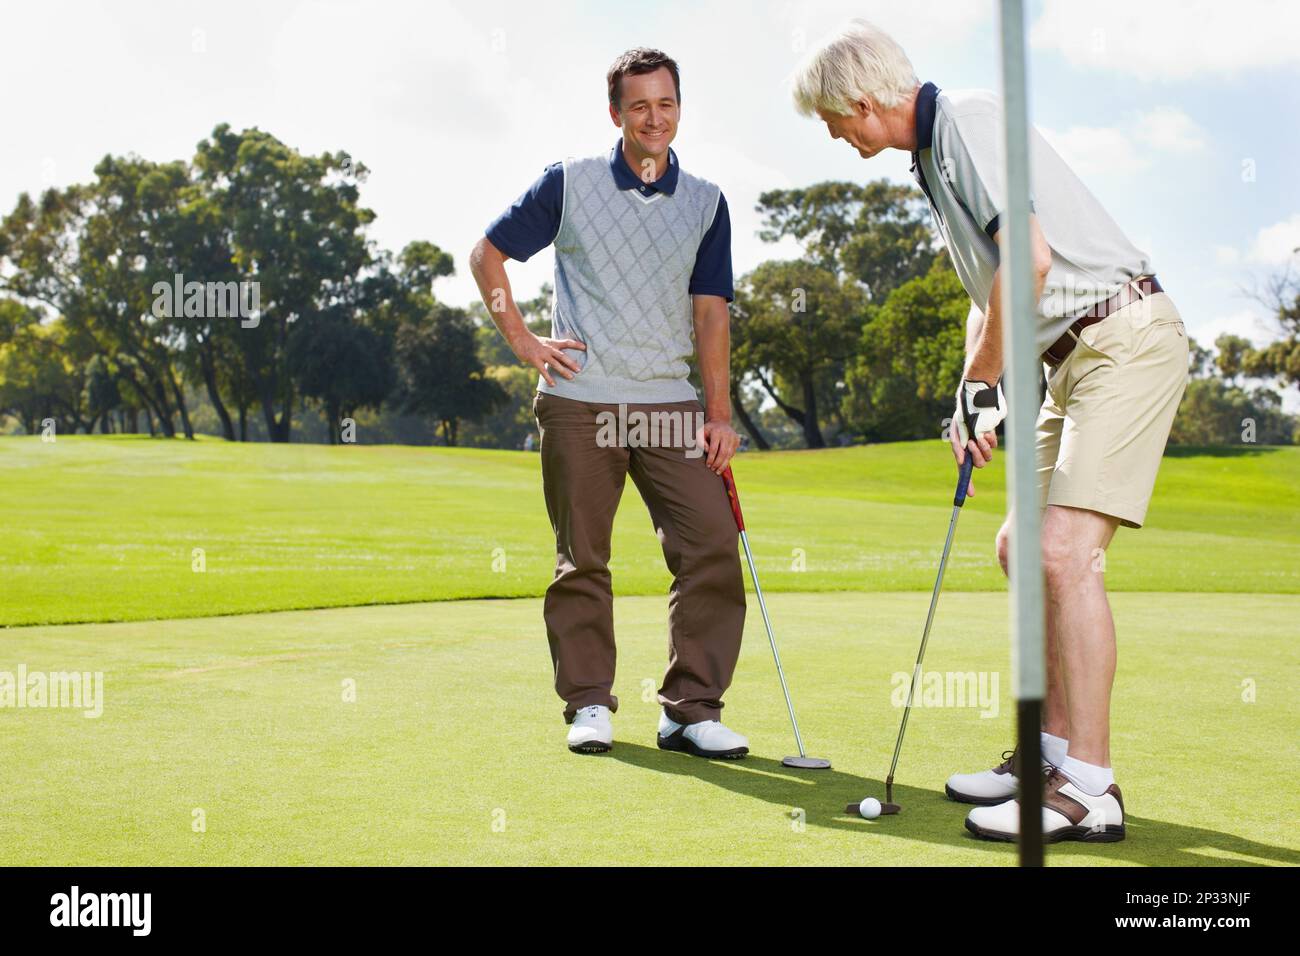 Golfing is a great way to bond. Two men out on the green playing a round of golf together. Stock Photo